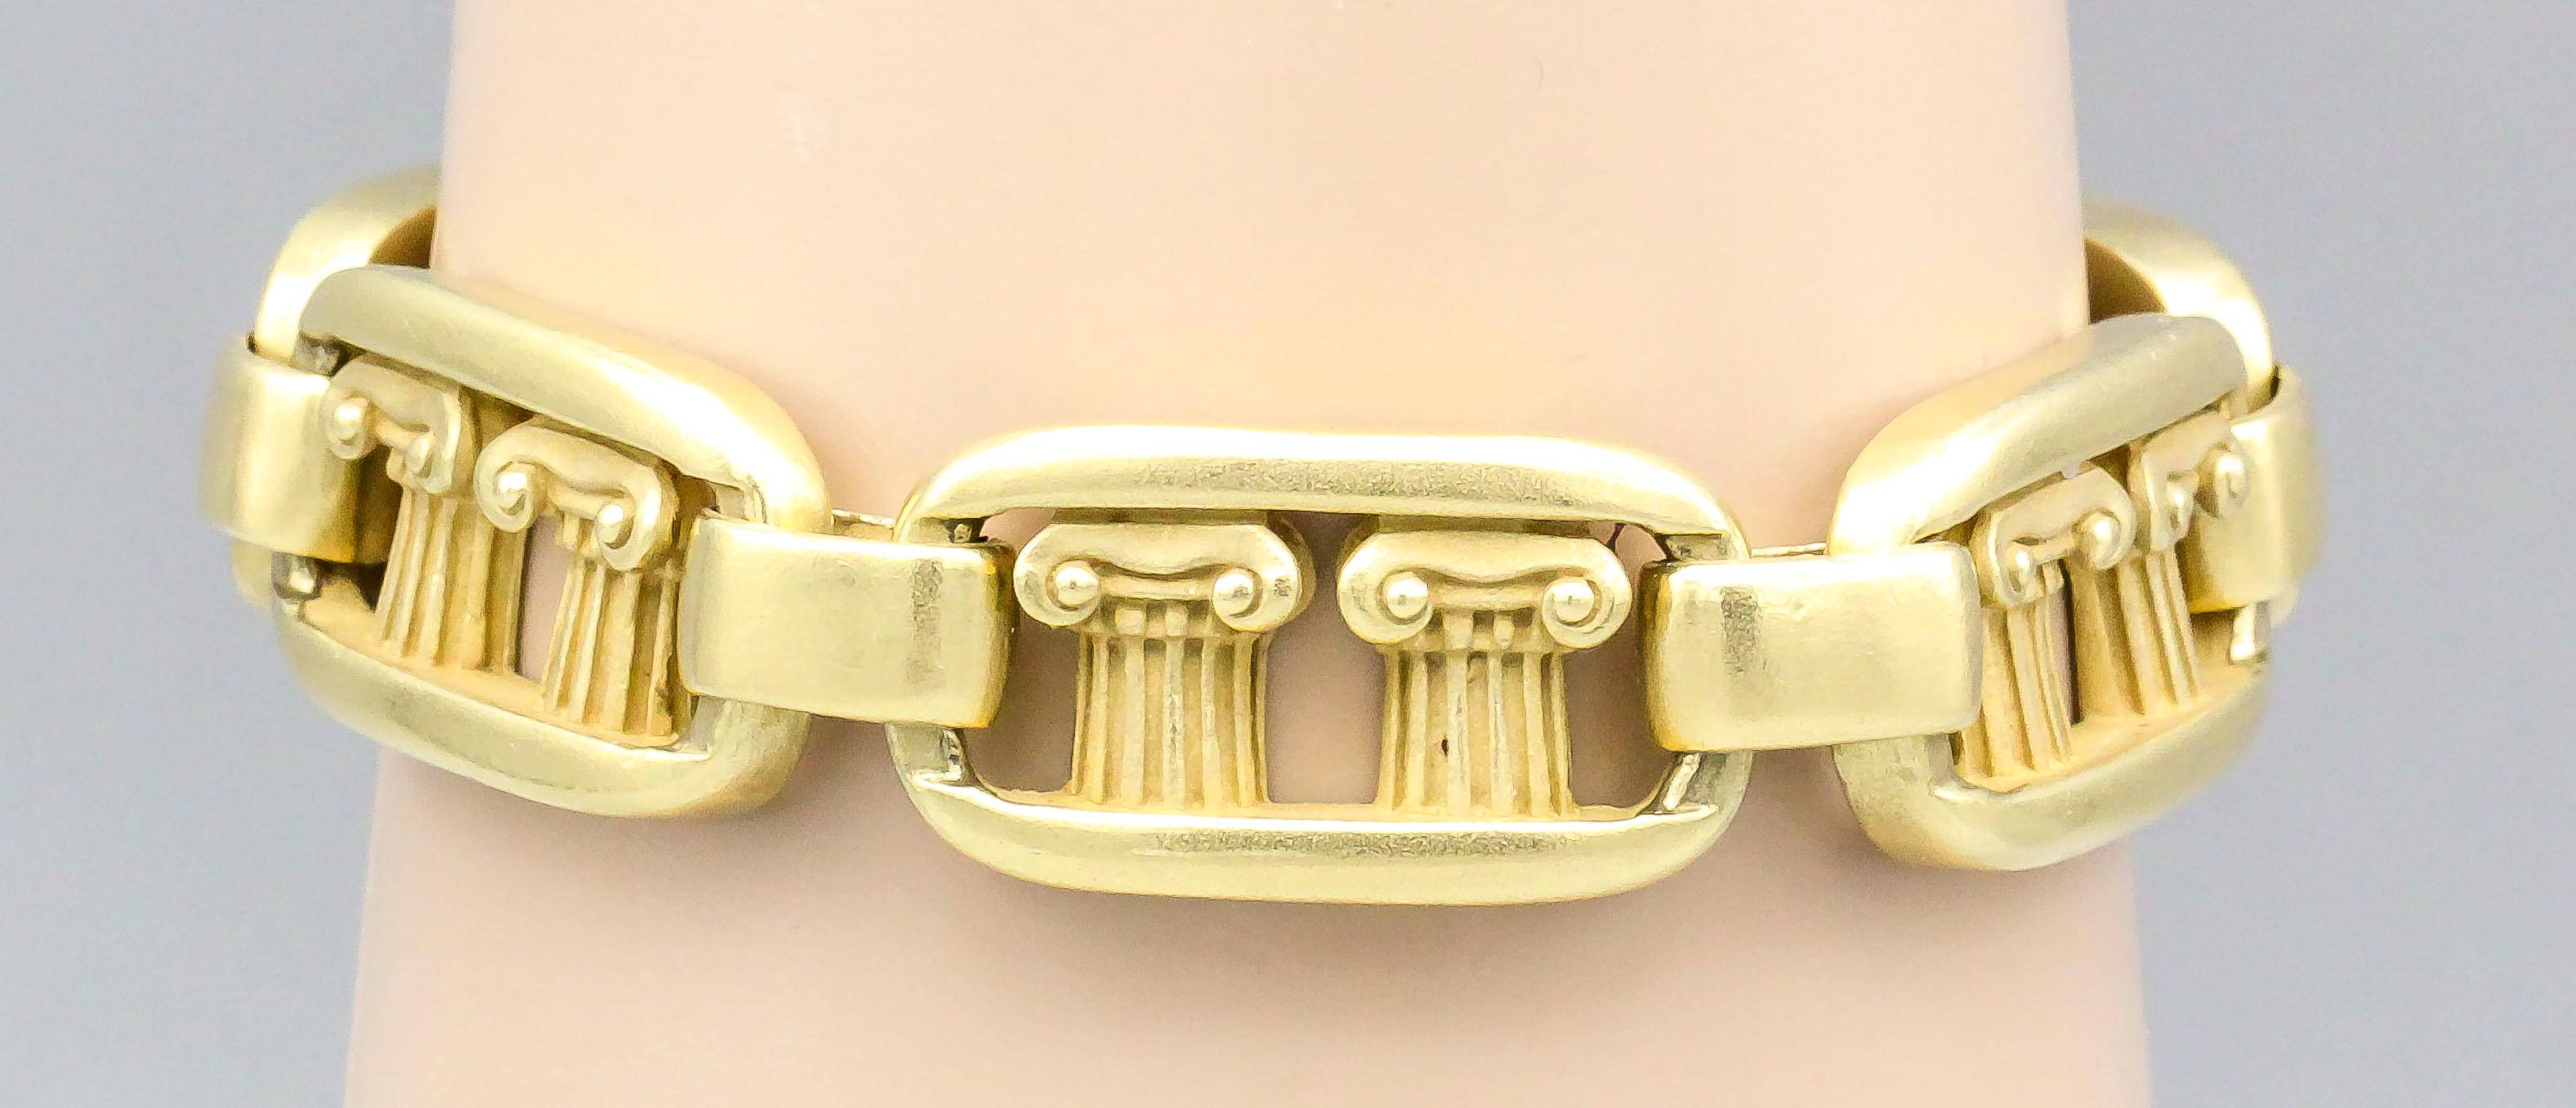 Fine 18k  gold link bracelet by Kieselstein-Cord.  This bracelet features a Greek column design on each link .  Total weight a substantial 120.5 grams, total length over 7.5 inches.

Hallmarks: Kieselstein-Cord, 18k, 1980, maker's mark.